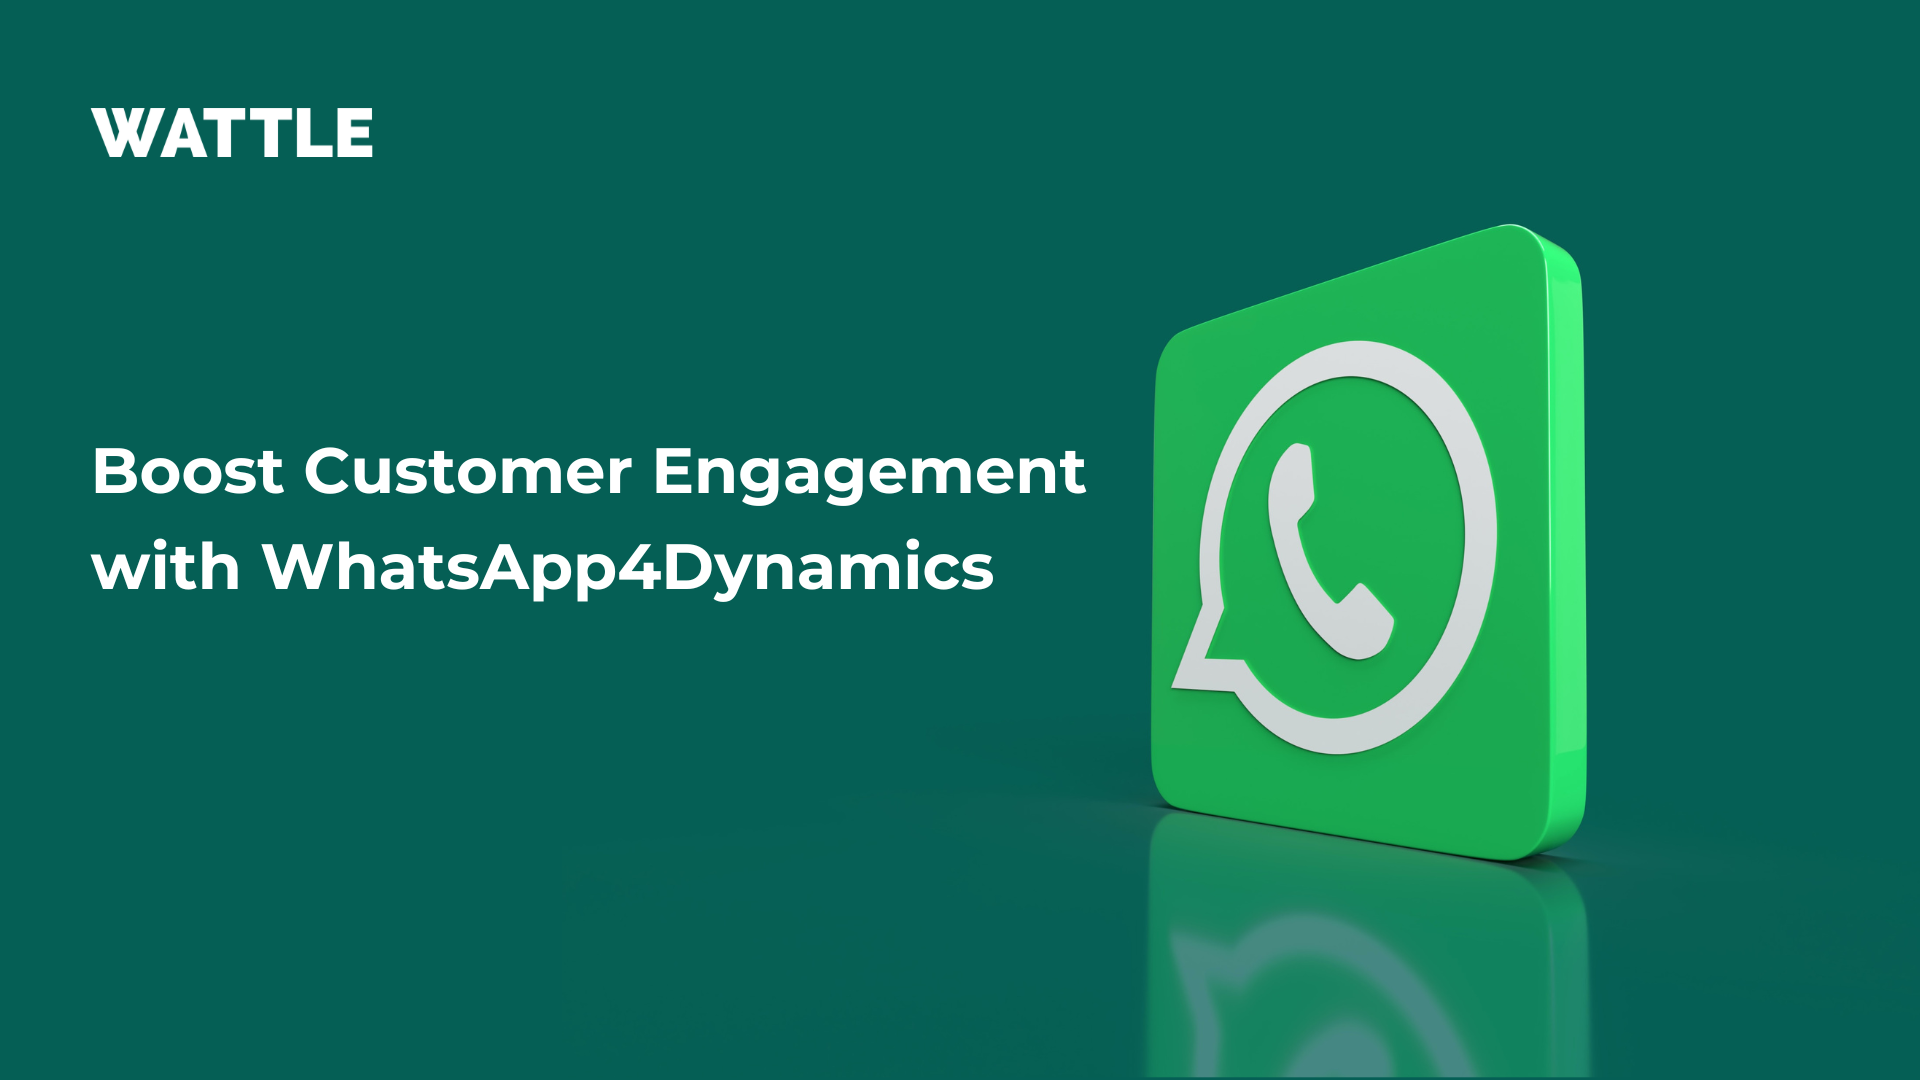 Image: Boot customer engagement with WhatsApp4Dynamics